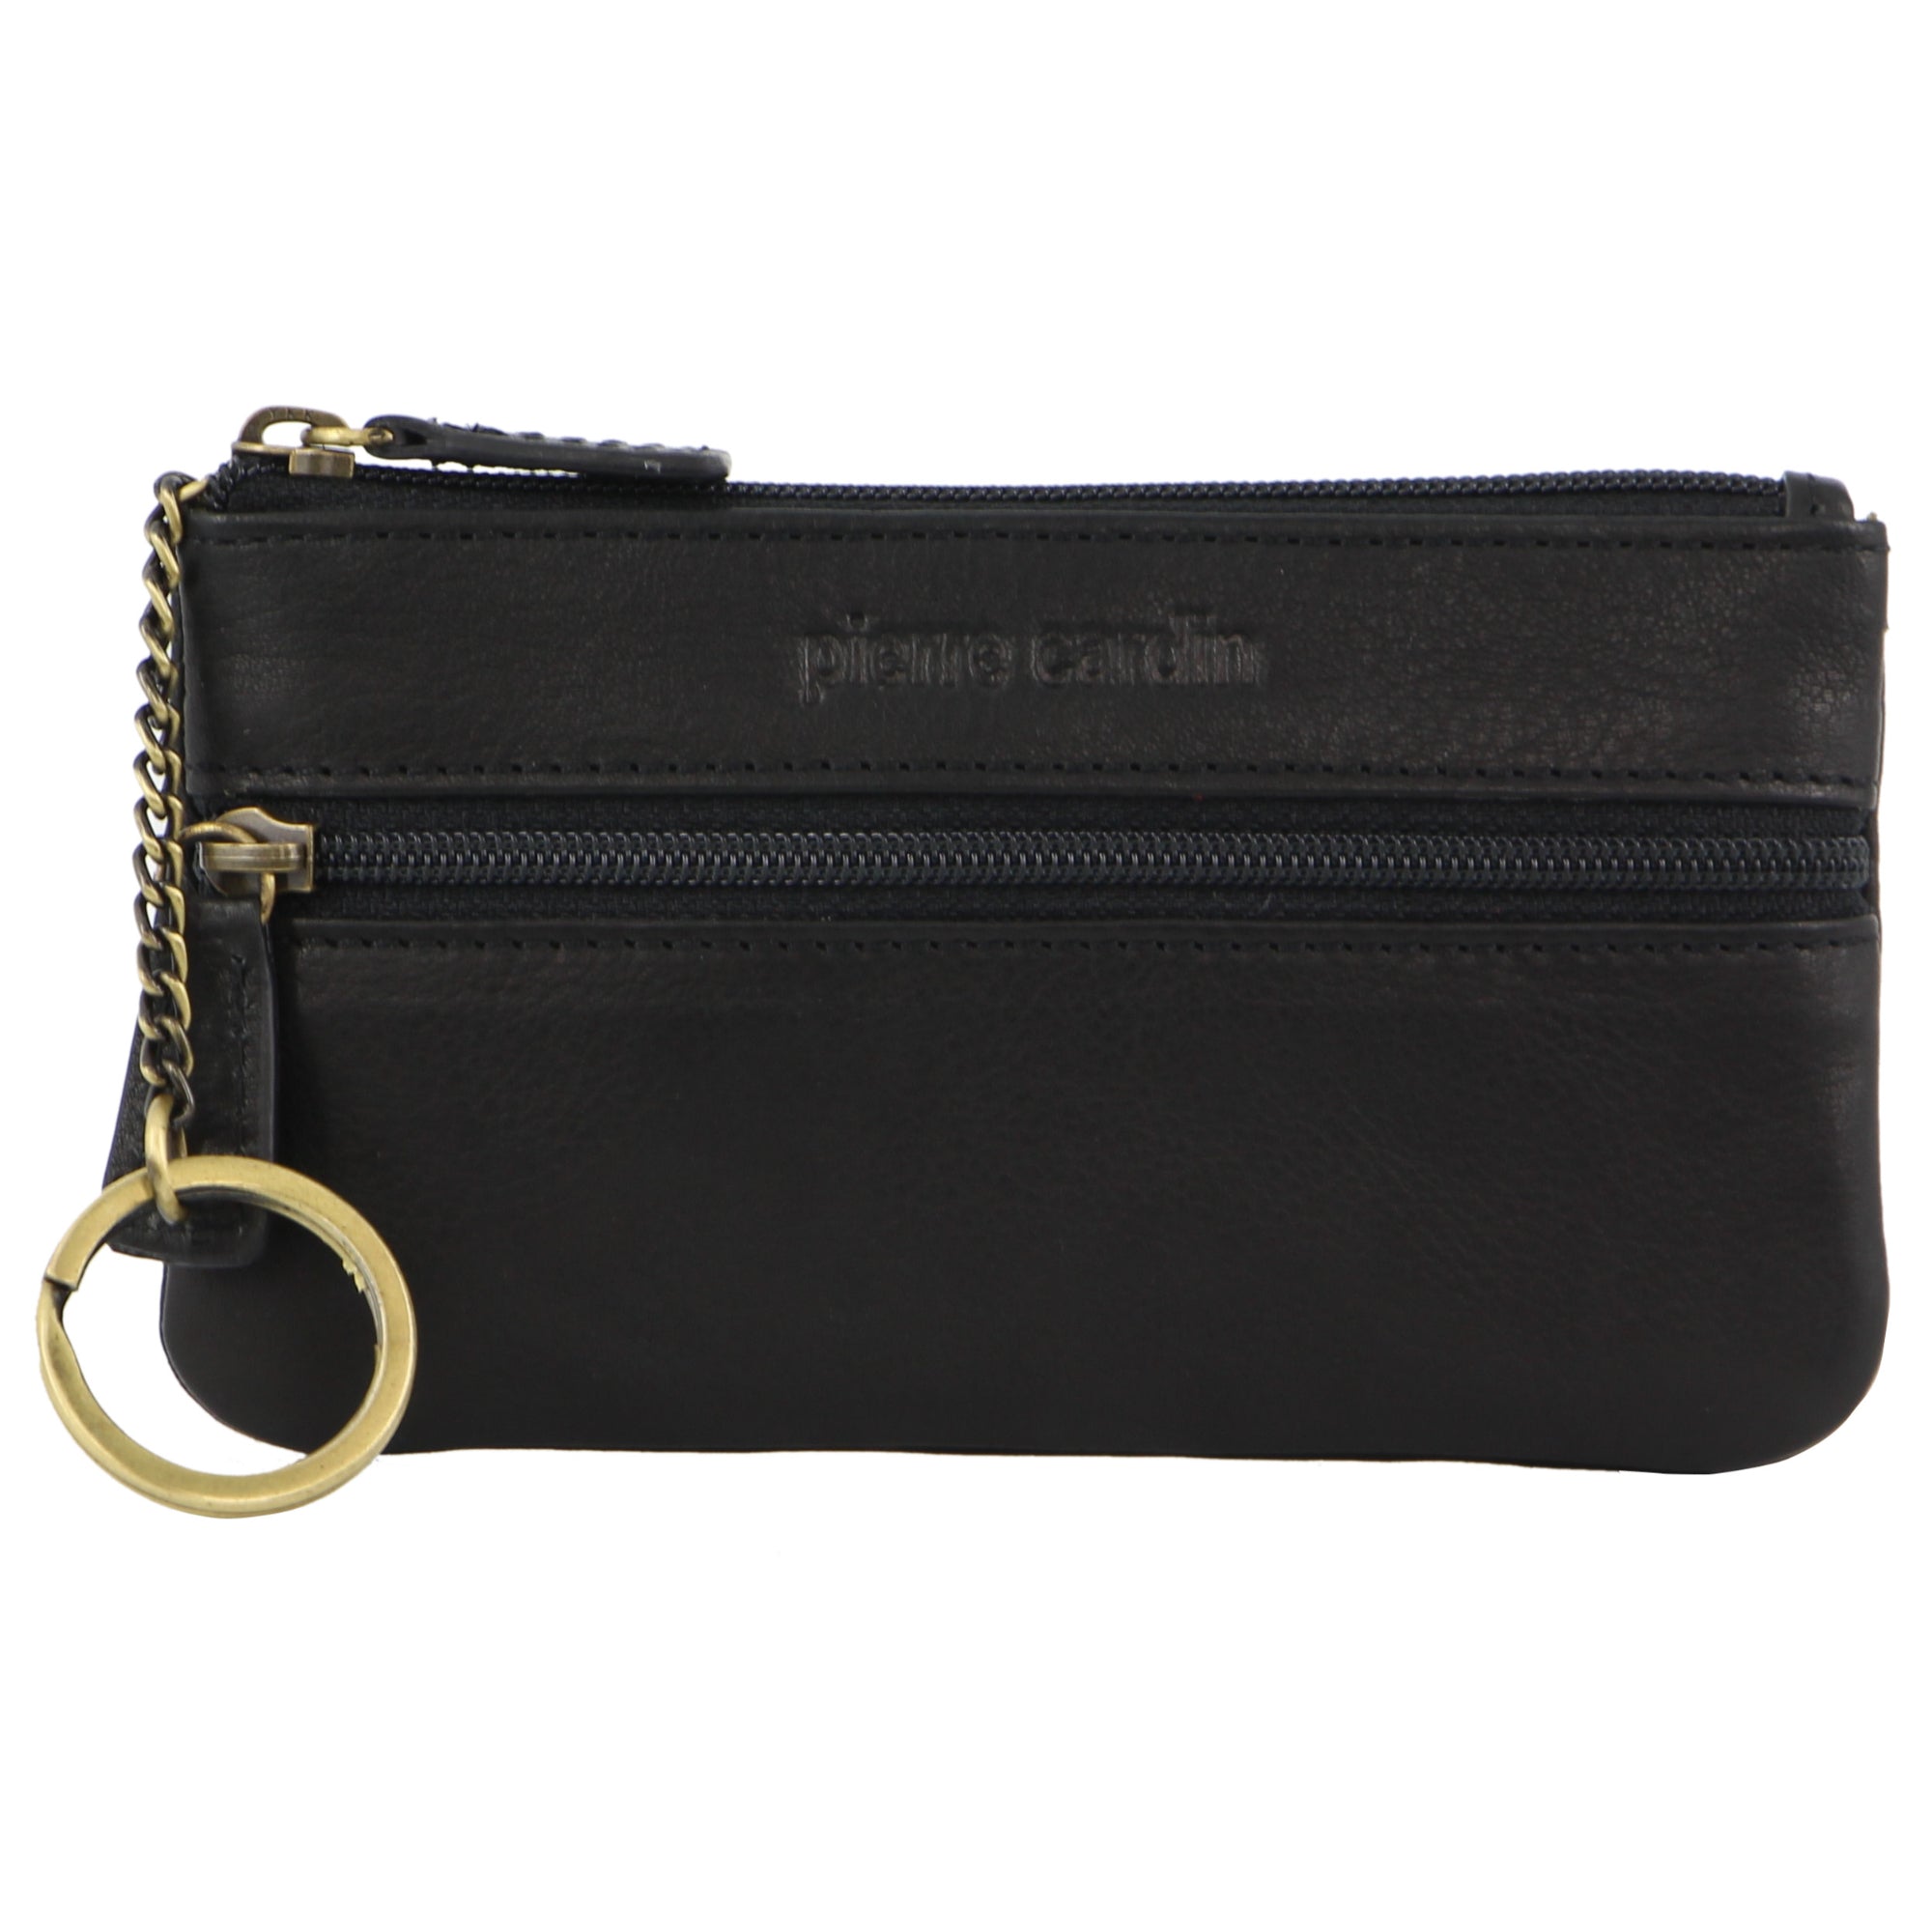 Pierre Cardin Leather Coin Purse/Key Holder in Black-Taupe